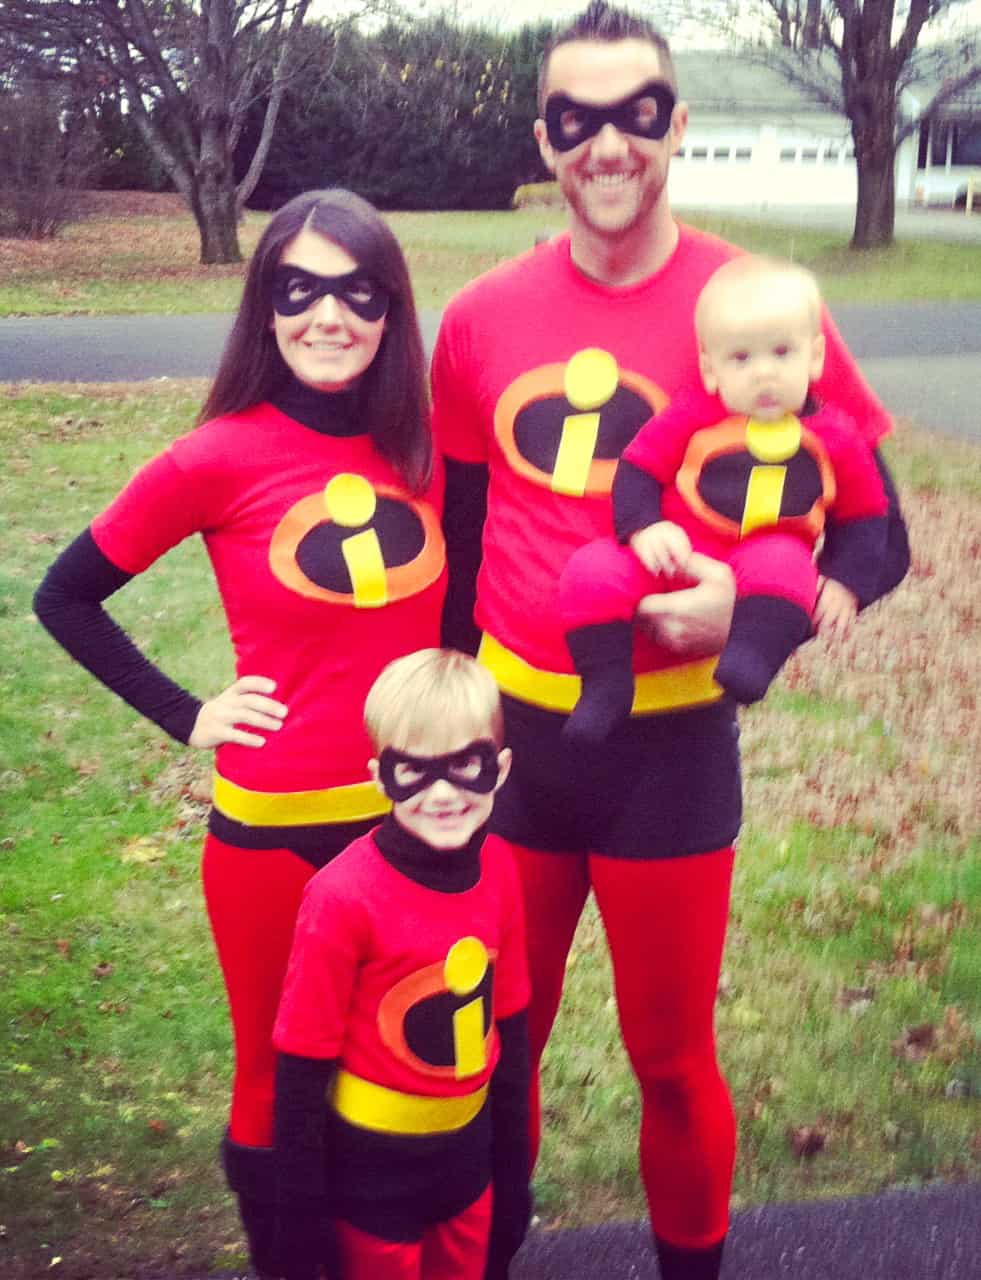 Family Halloween Costume Ideas - The Incredibles